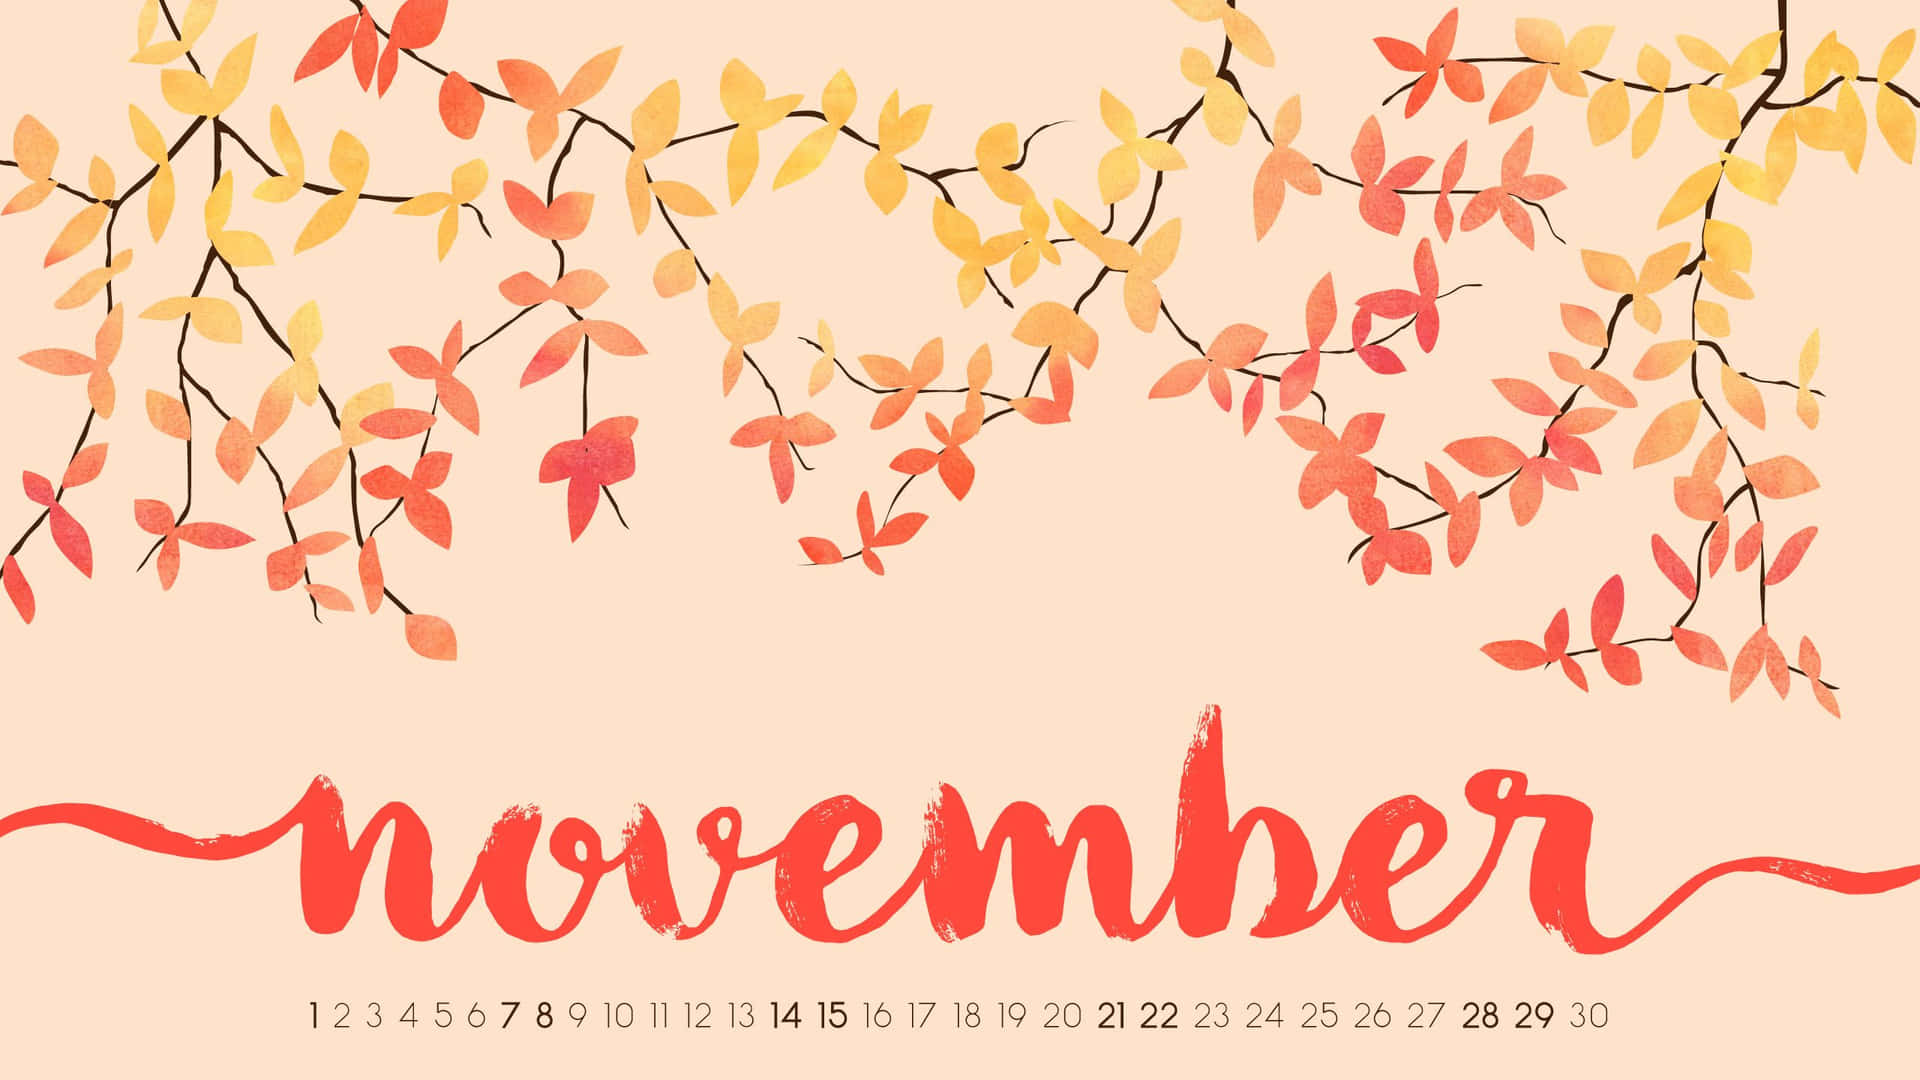 November Calendar With Leaves And Leaves